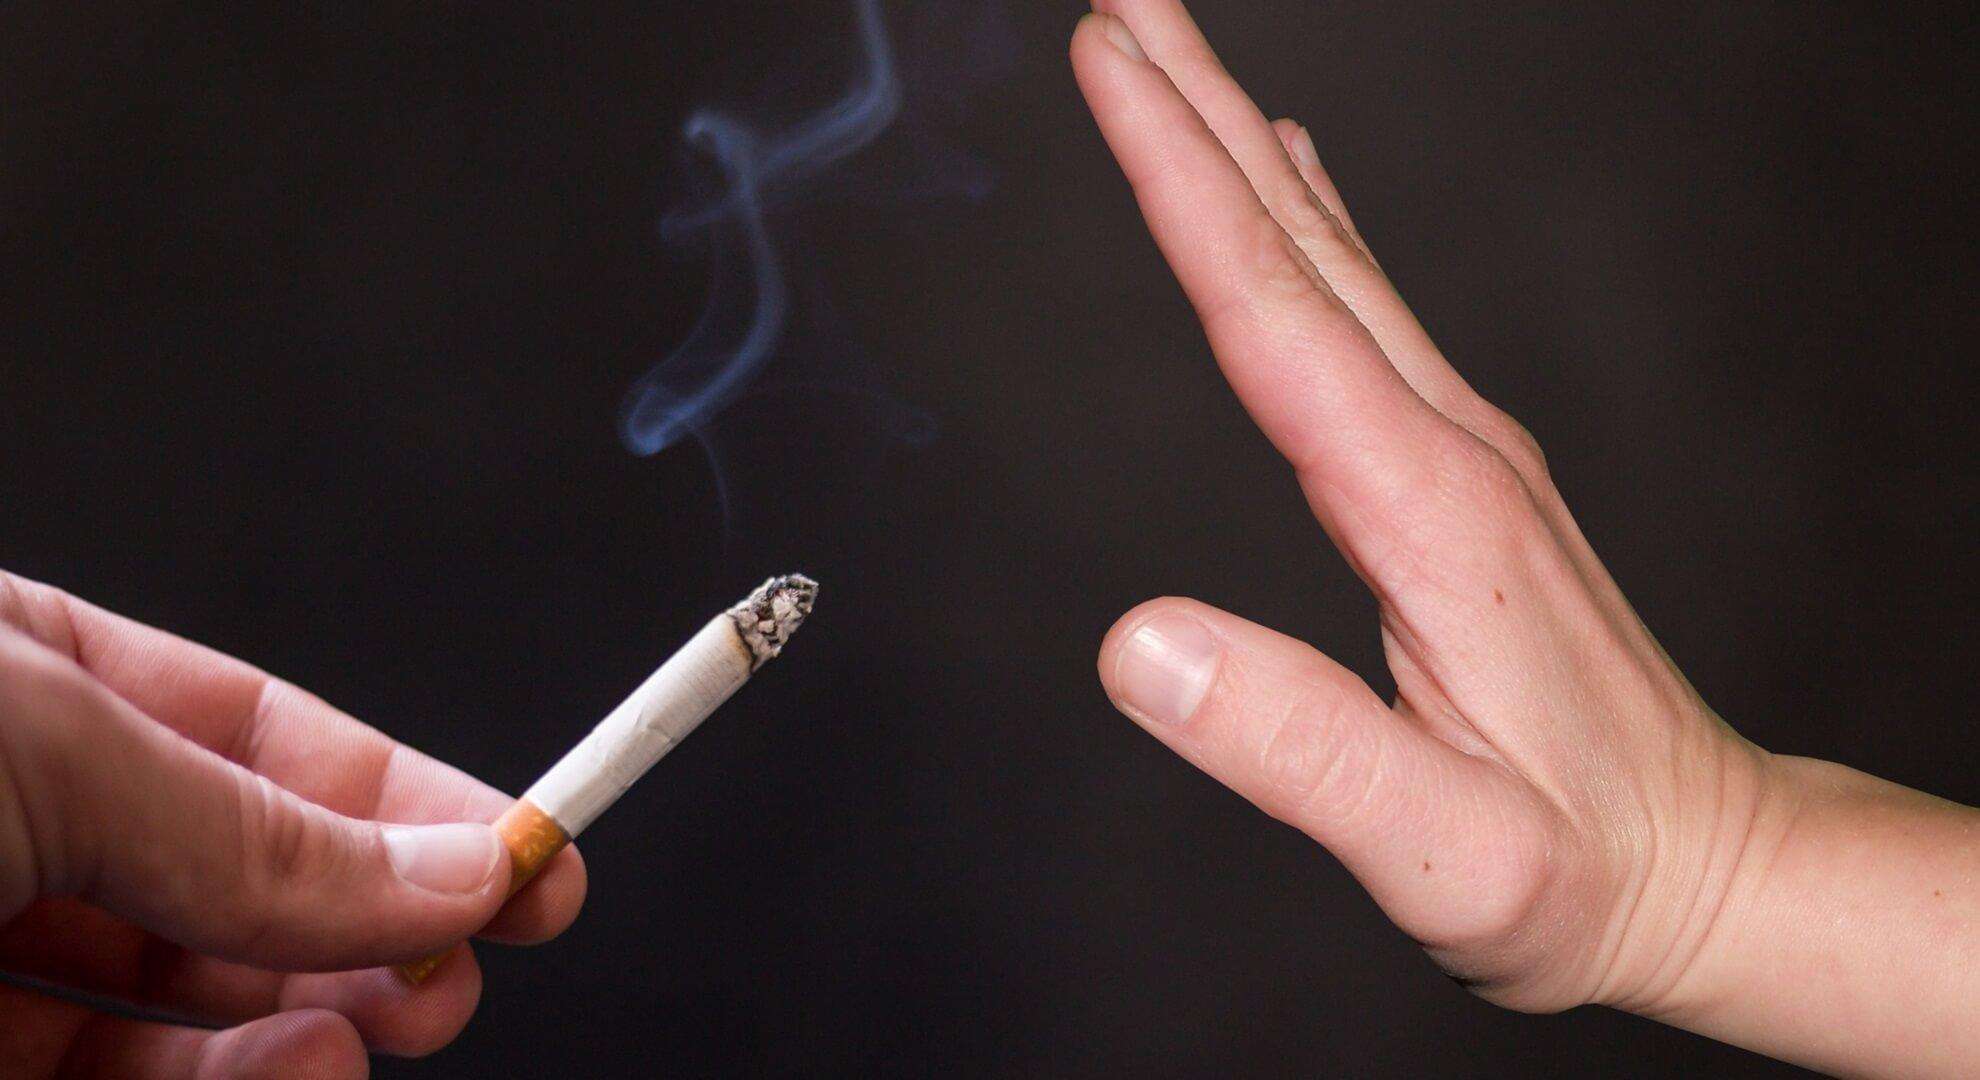 How to get rid of smoking addiction?